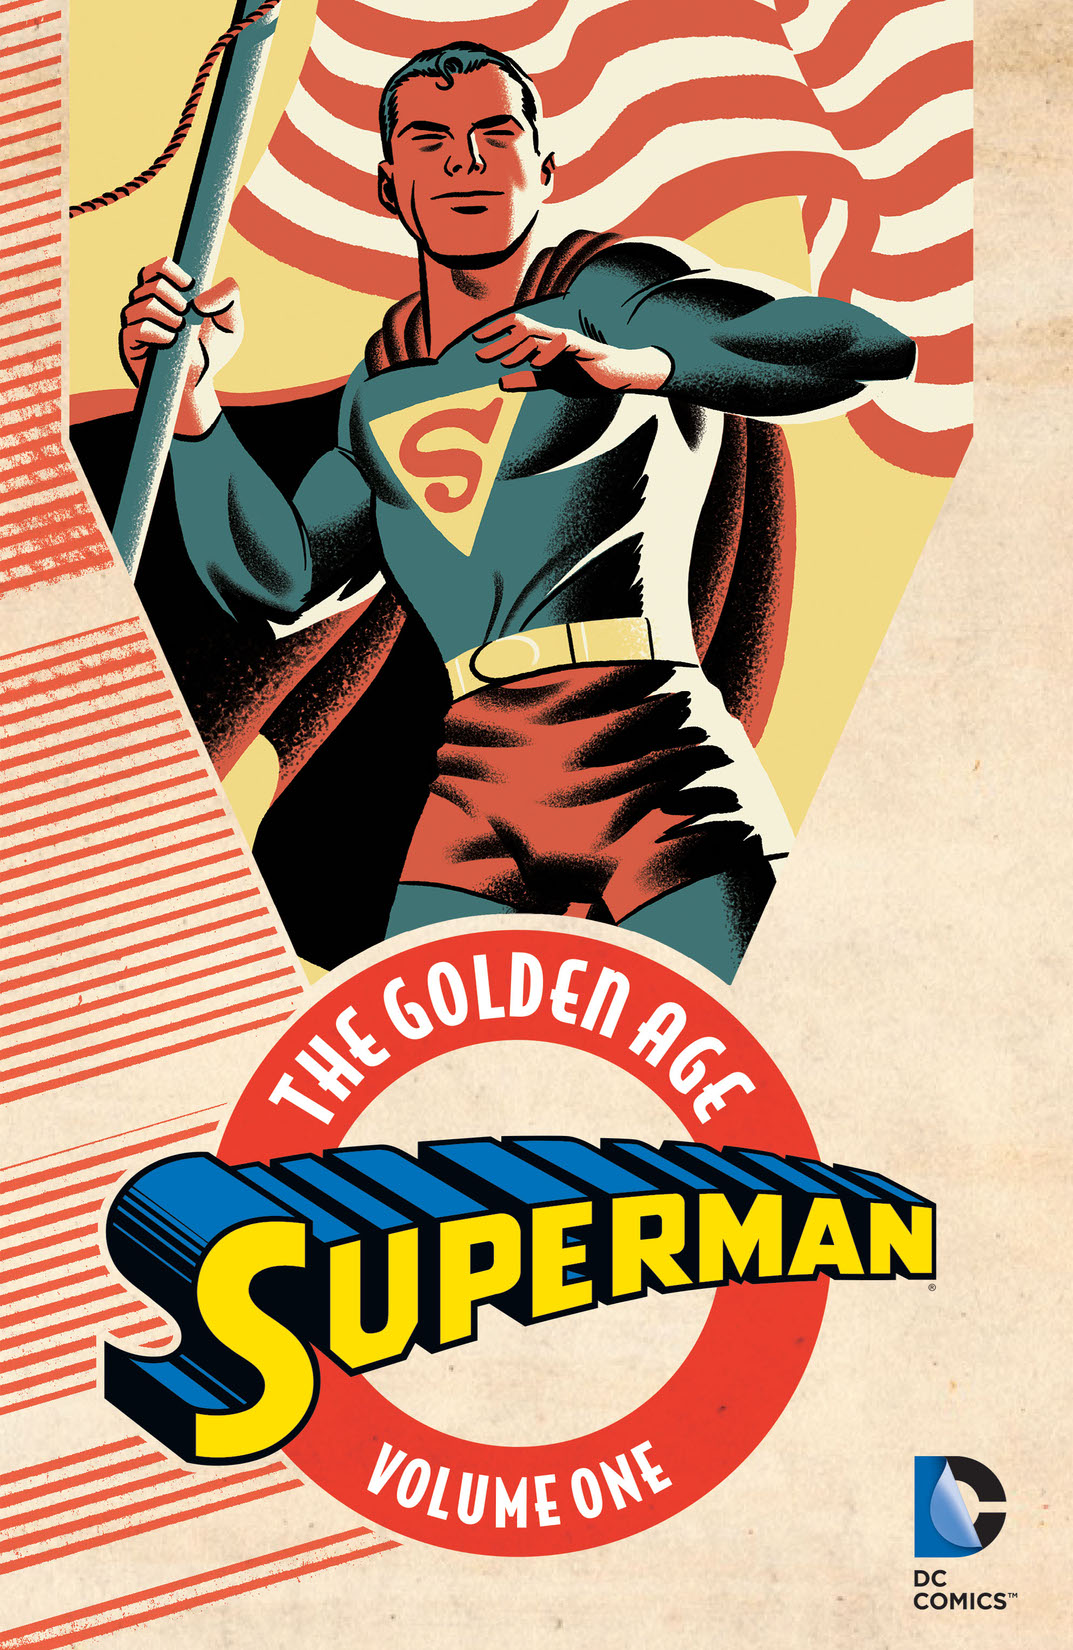 Superman: The Golden Age Vol. 1 preview images